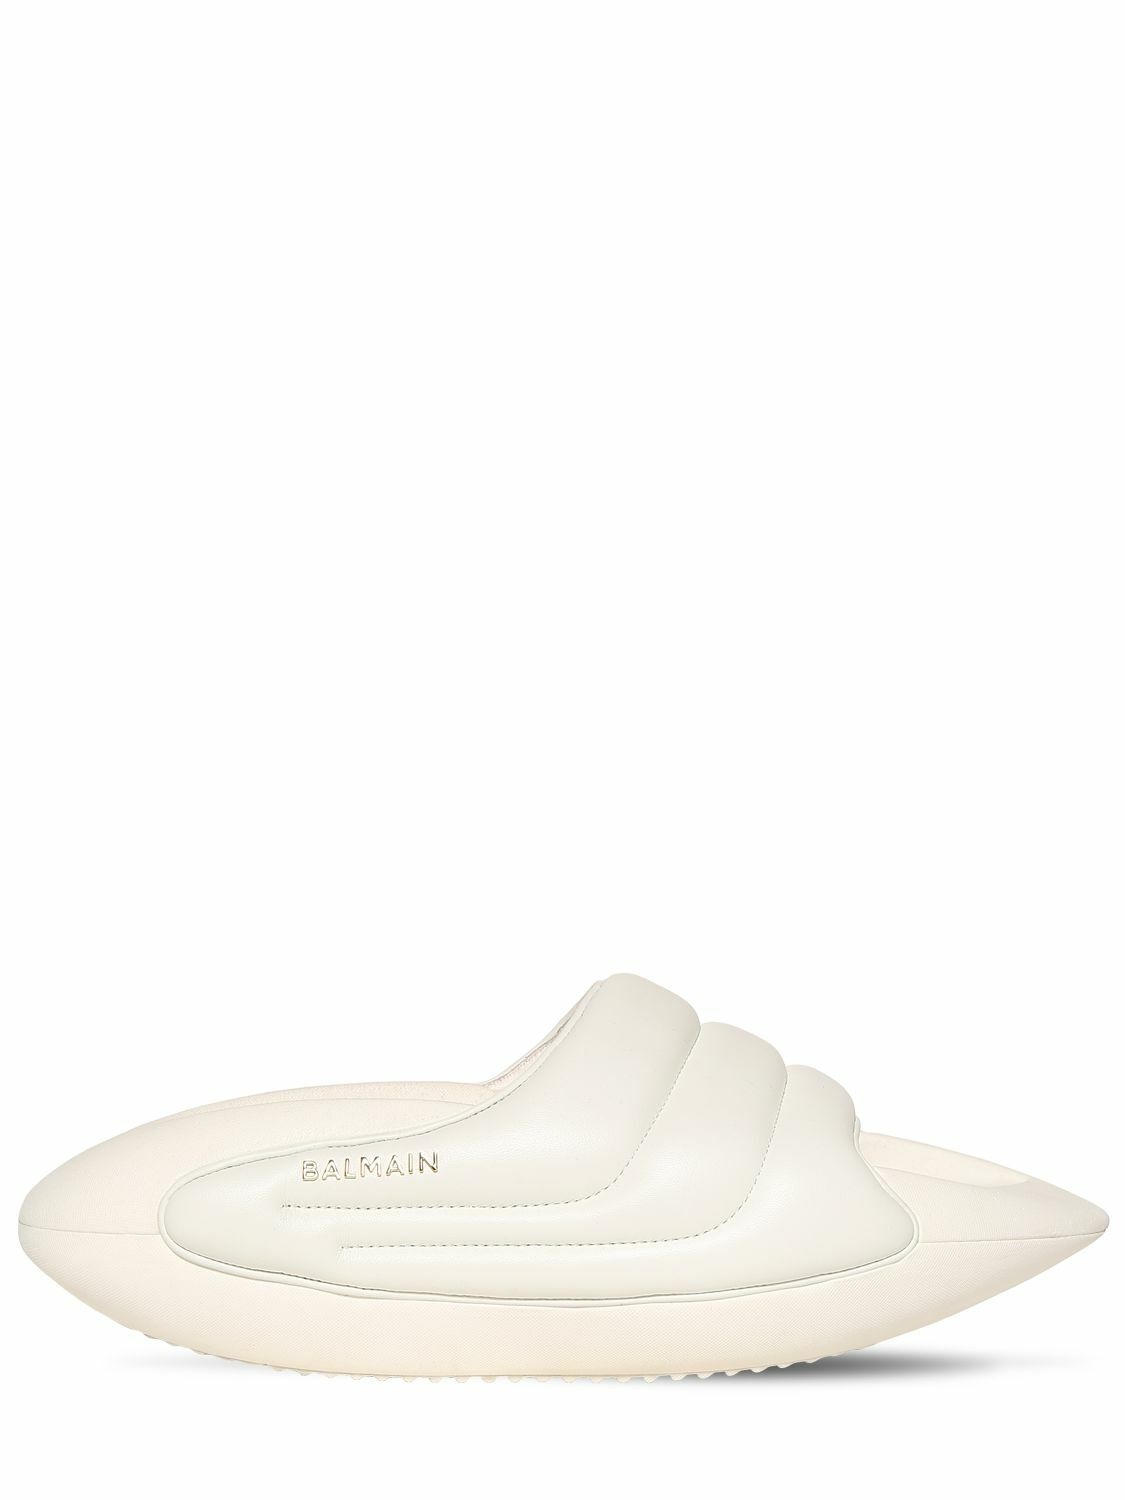 Photo: BALMAIN - B It Puffy Quilted Leather Slide Sandals